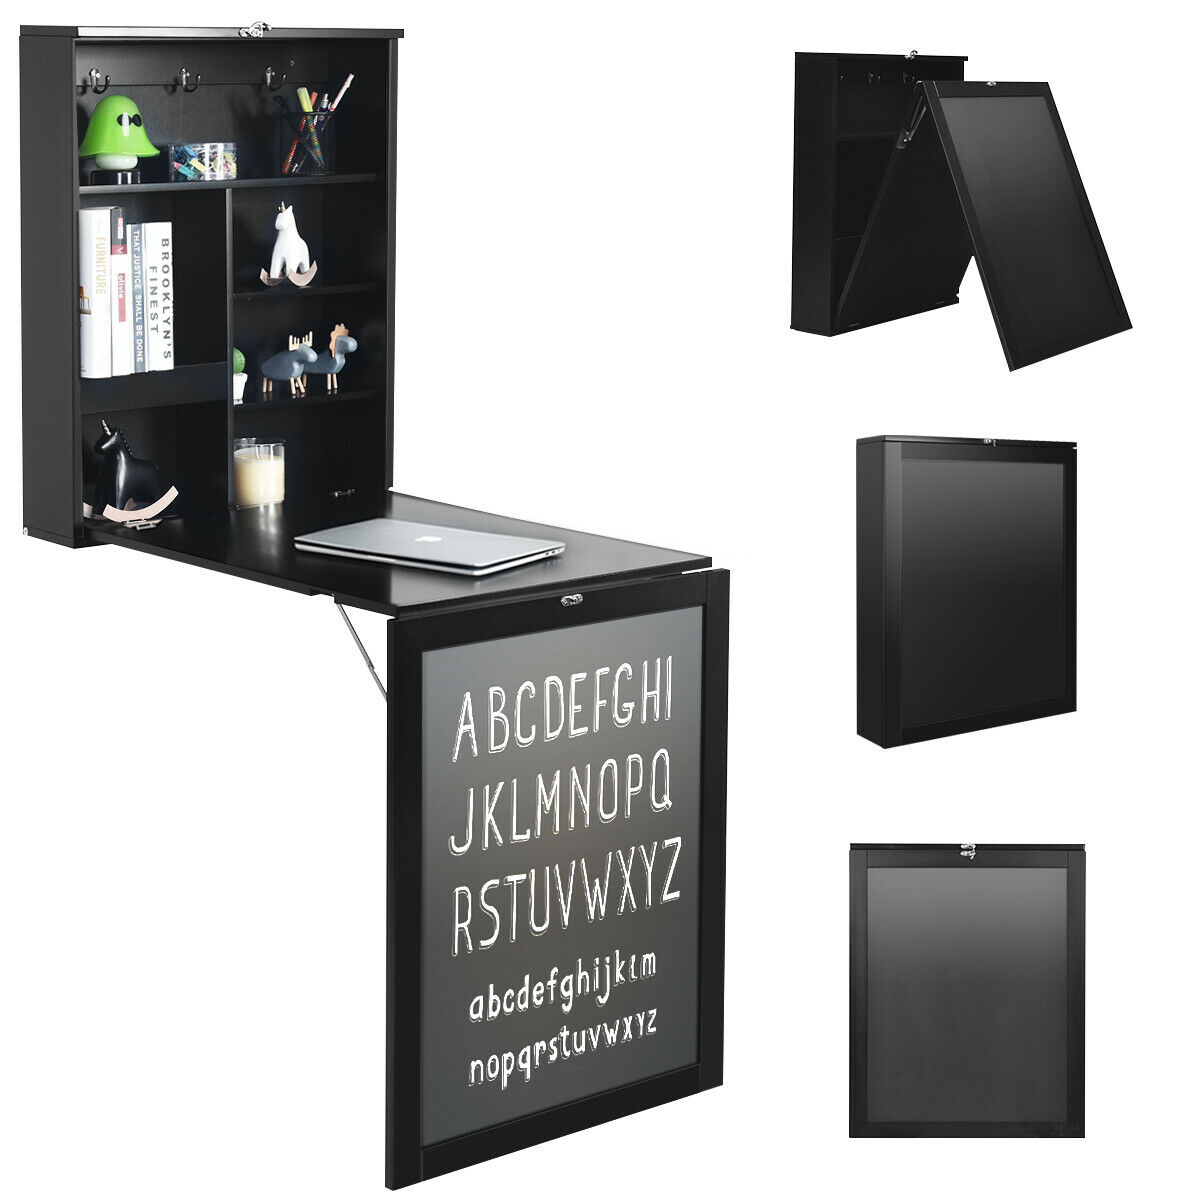 White/Black/Brown Wall Mounted Table Fold Out Desk With A Blackboard/Chalkboard - Black